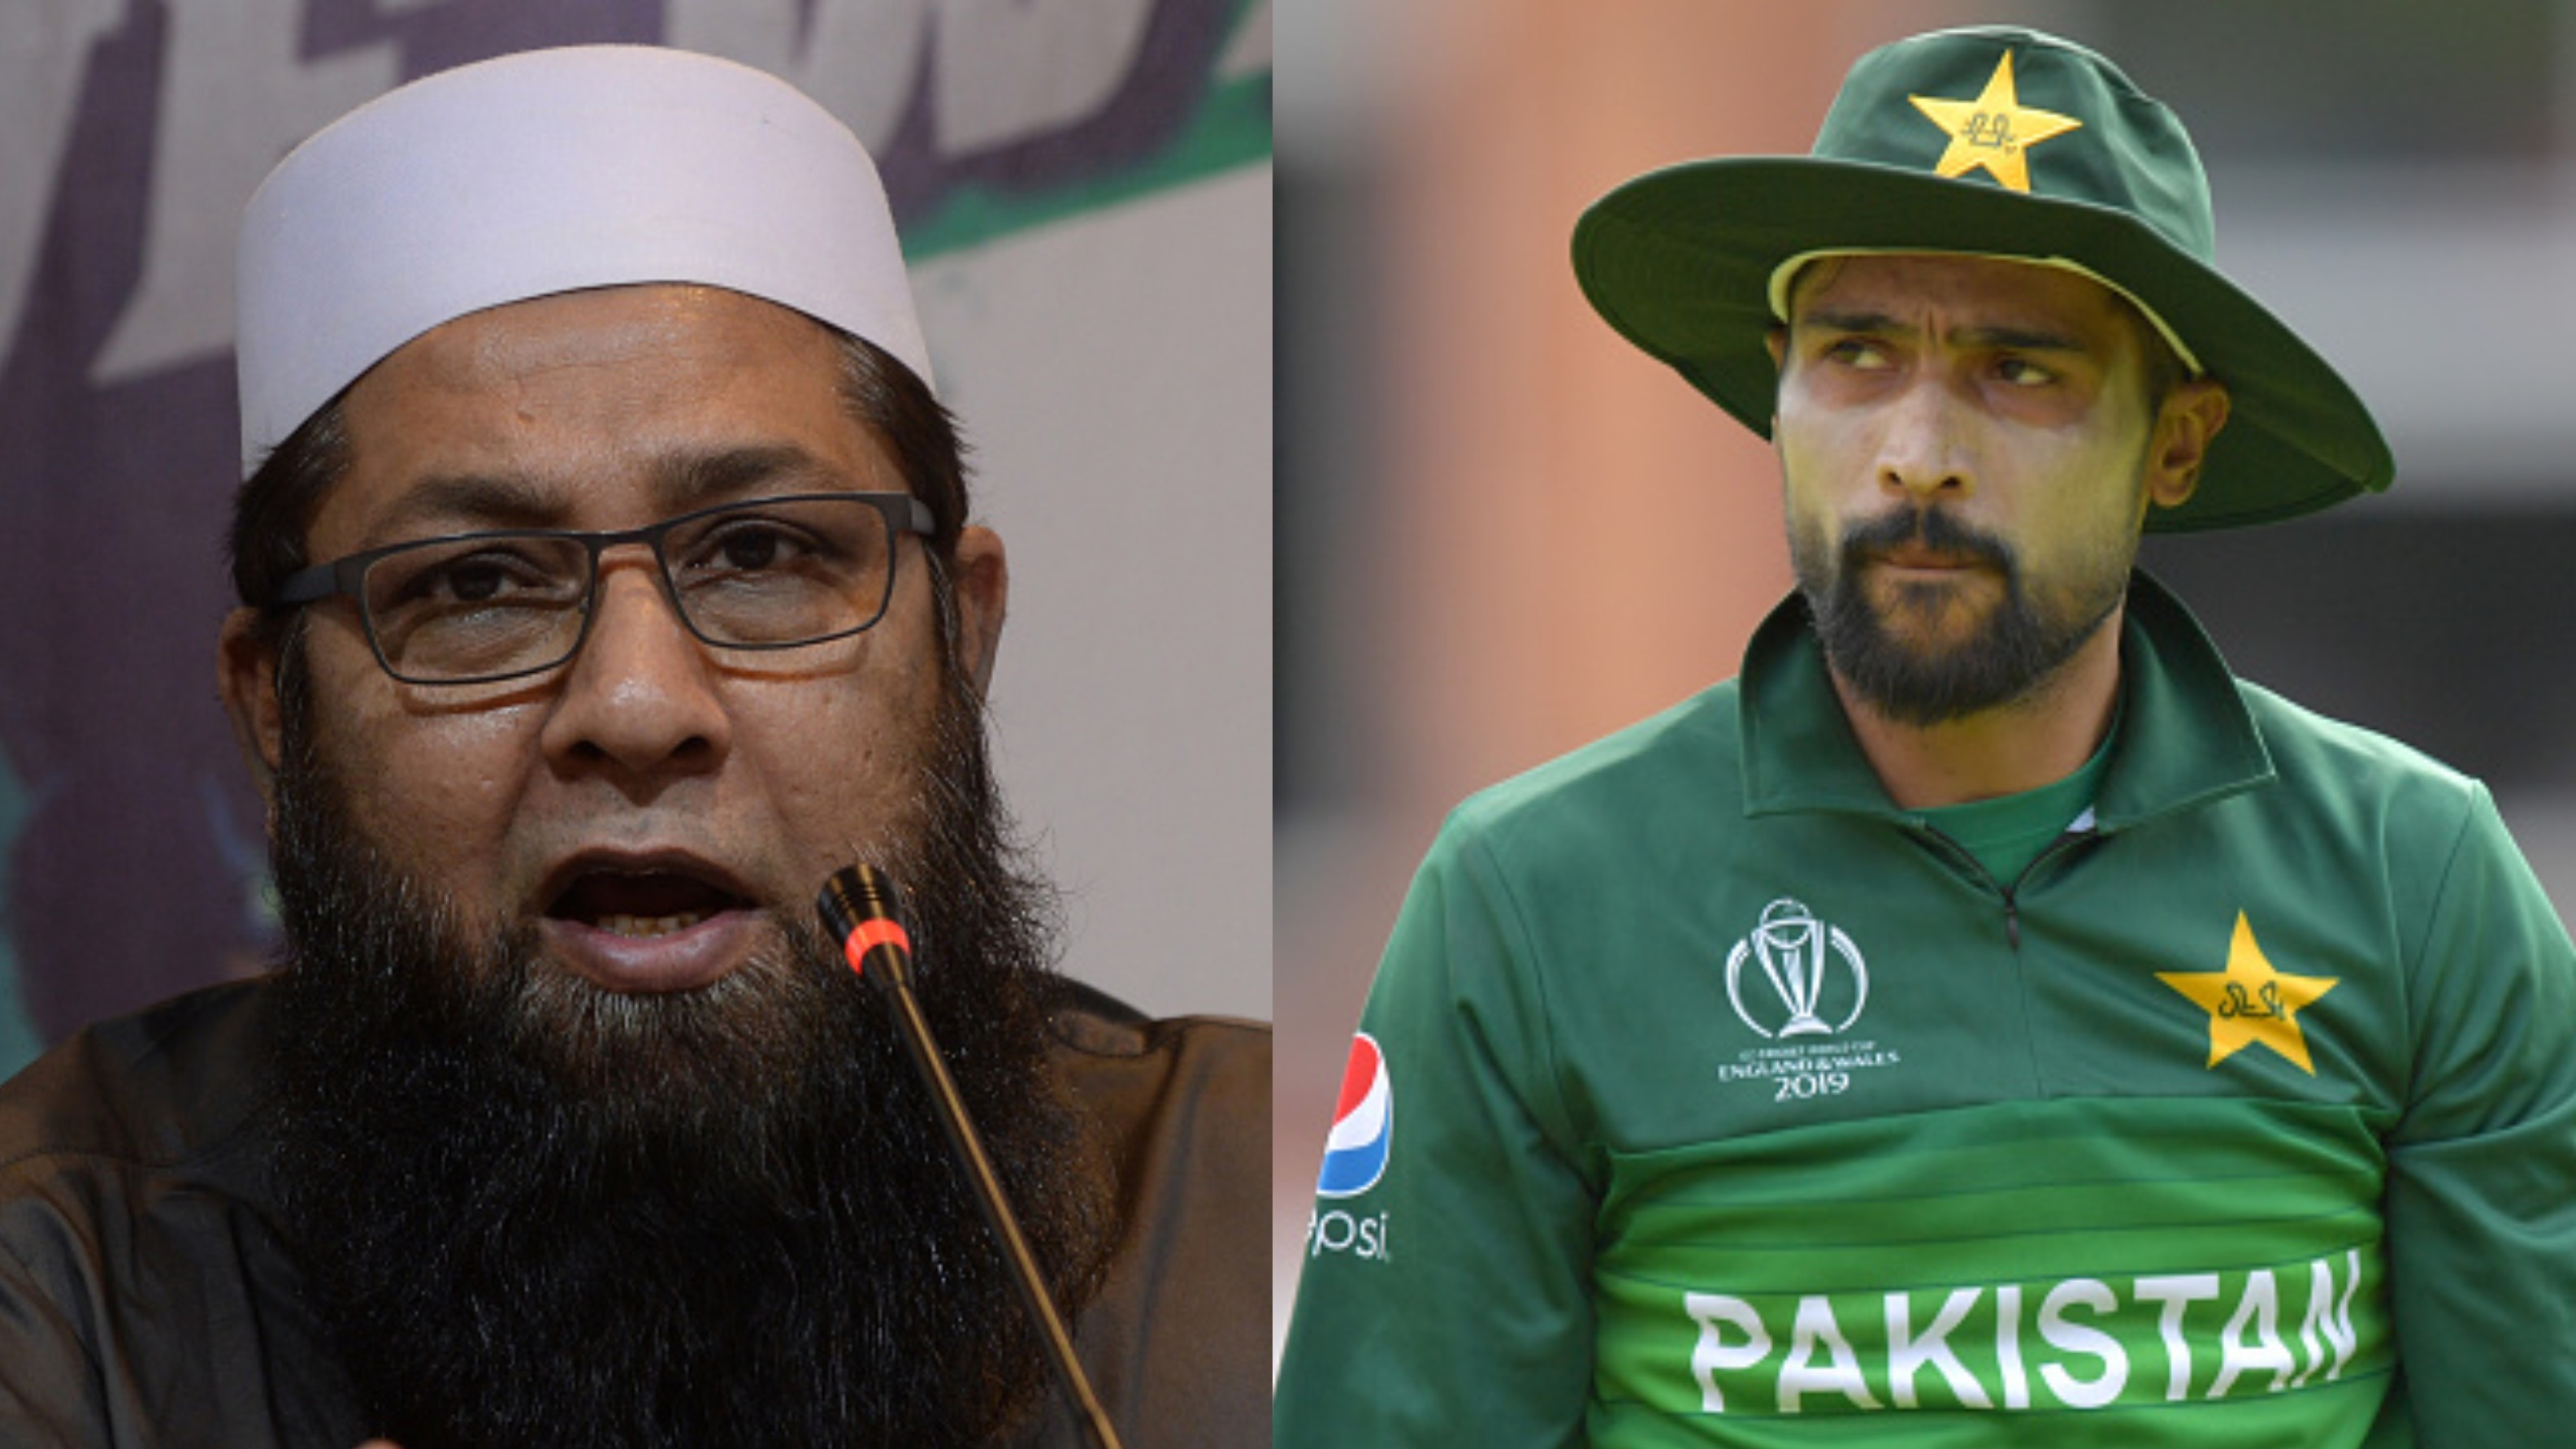 Mohammad Amir’s controversial retirement will negatively impact Pakistan Cricket, says Inzamam